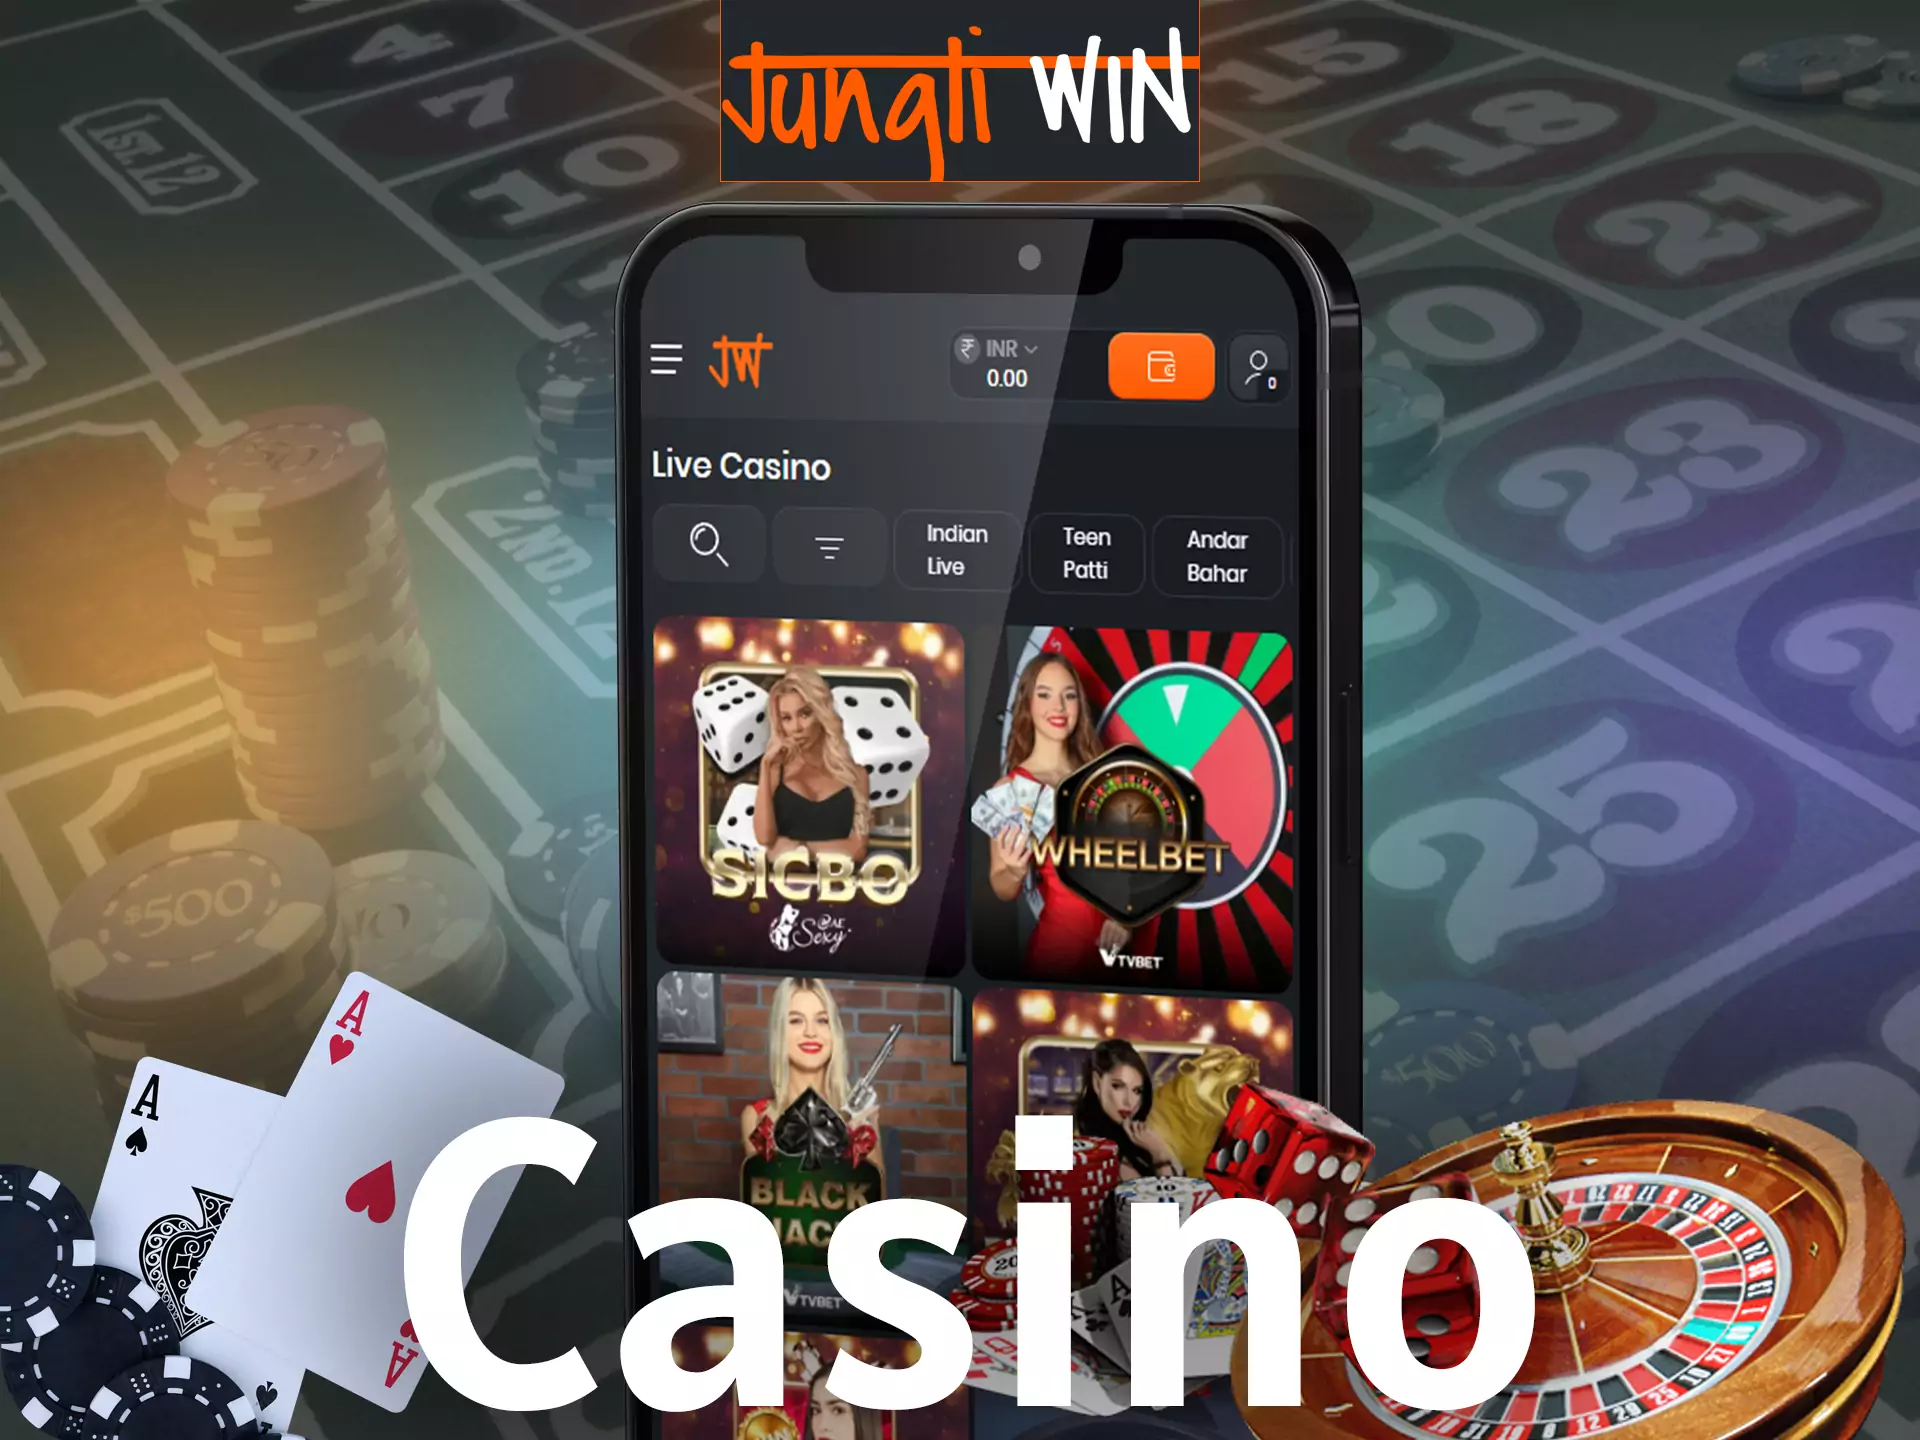 At Jungliwin you can try exciting casino entertainment.